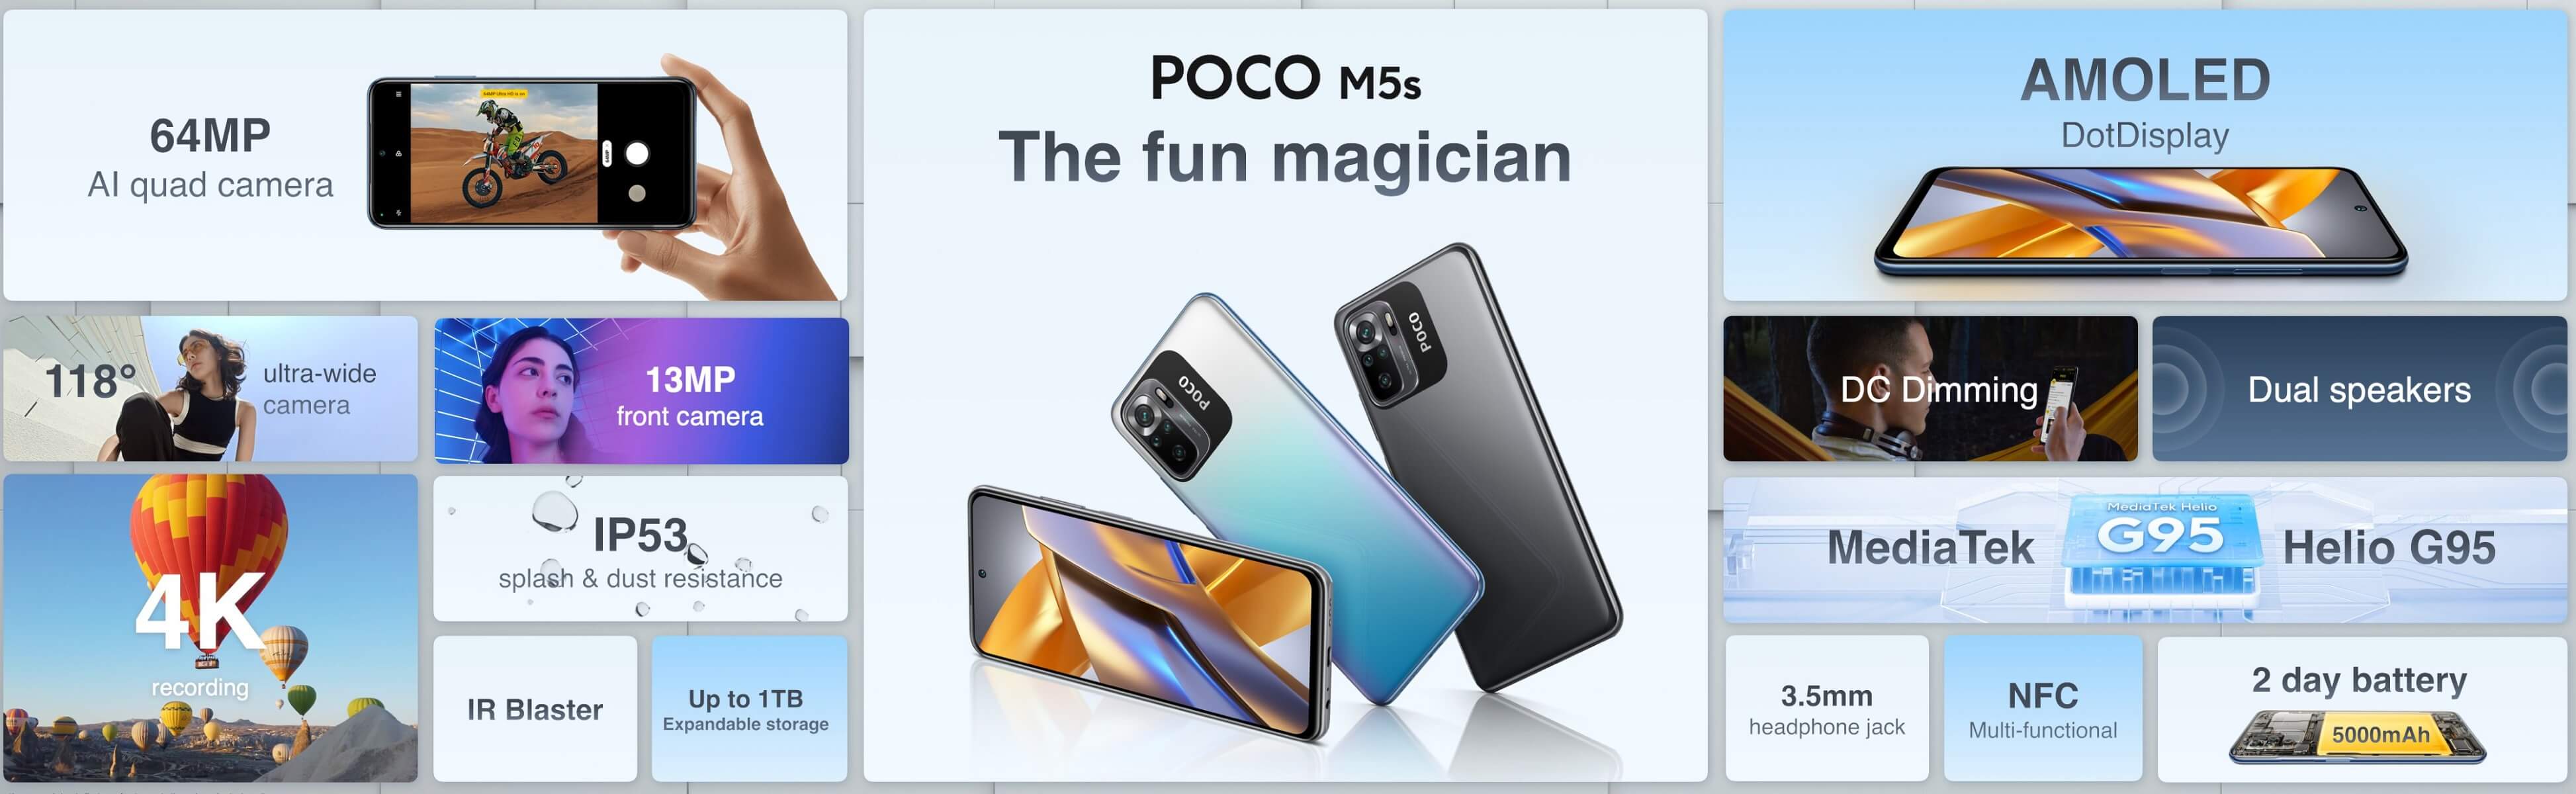 POCO M5s features global